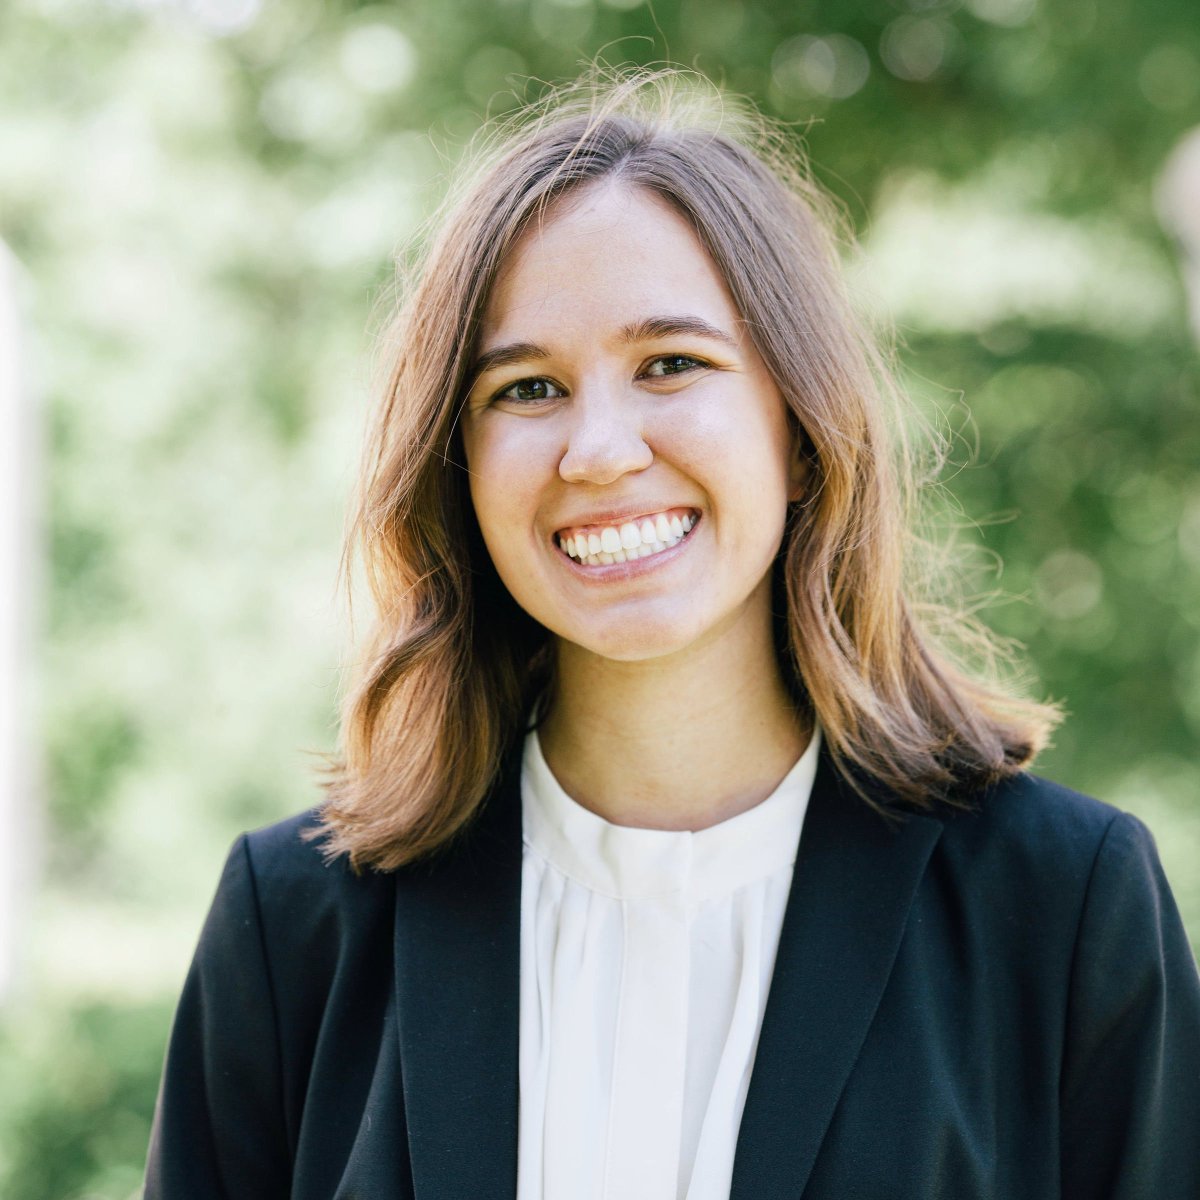 For the third consecutive year, an Indiana Law student has been selected as an @acslaw Next Generation Leader. Congratulations to 2L Allyson McBride! blogs.iu.edu/maurerlaw/2024…